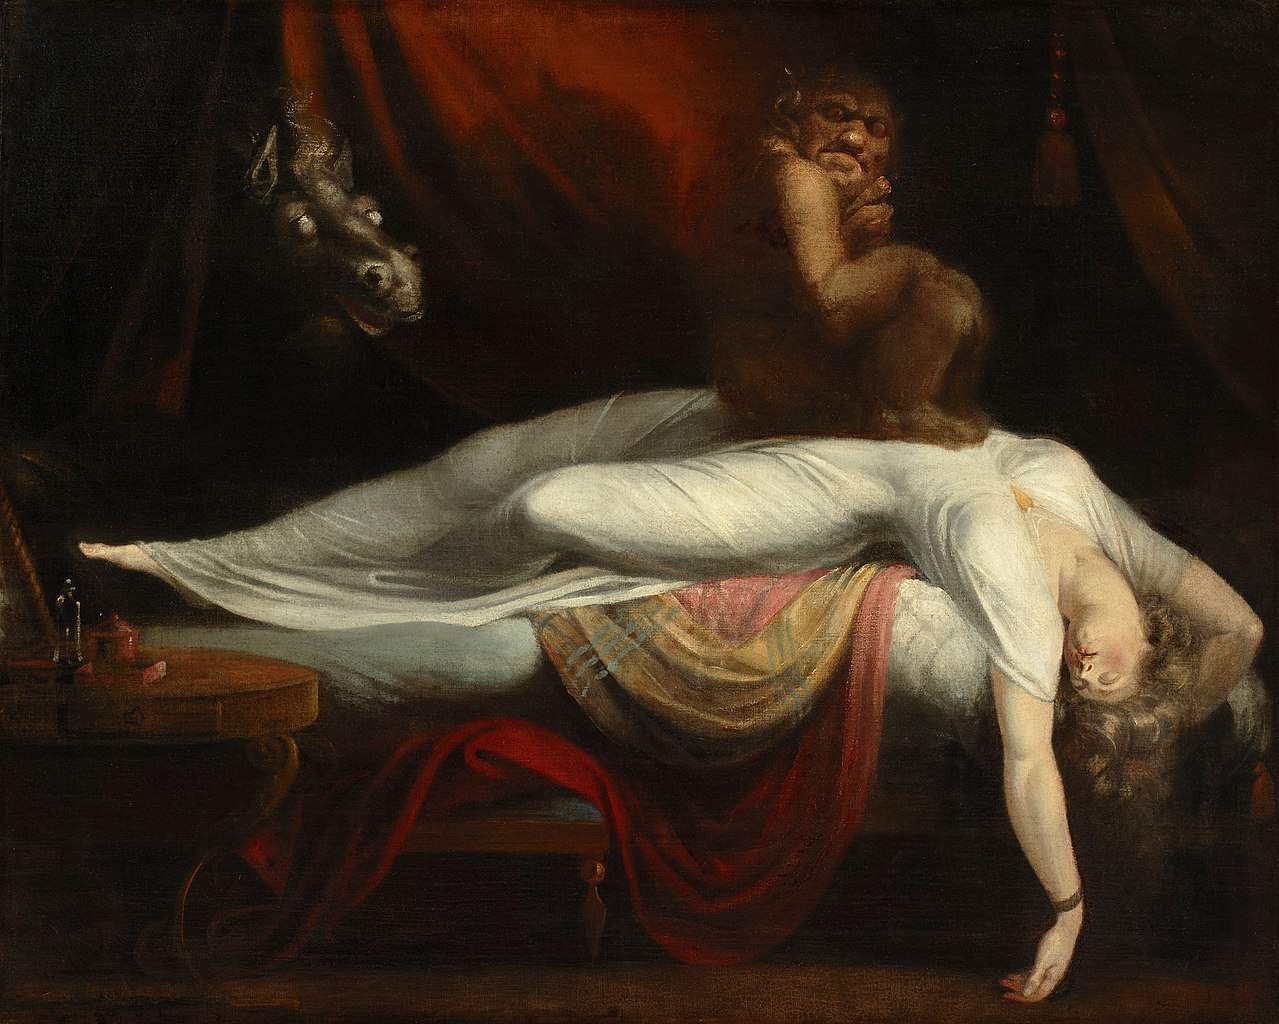 The Nightmare by Swiss artist Henry Fuseli (1781) is thought to be a depiction of sleep paralysis.